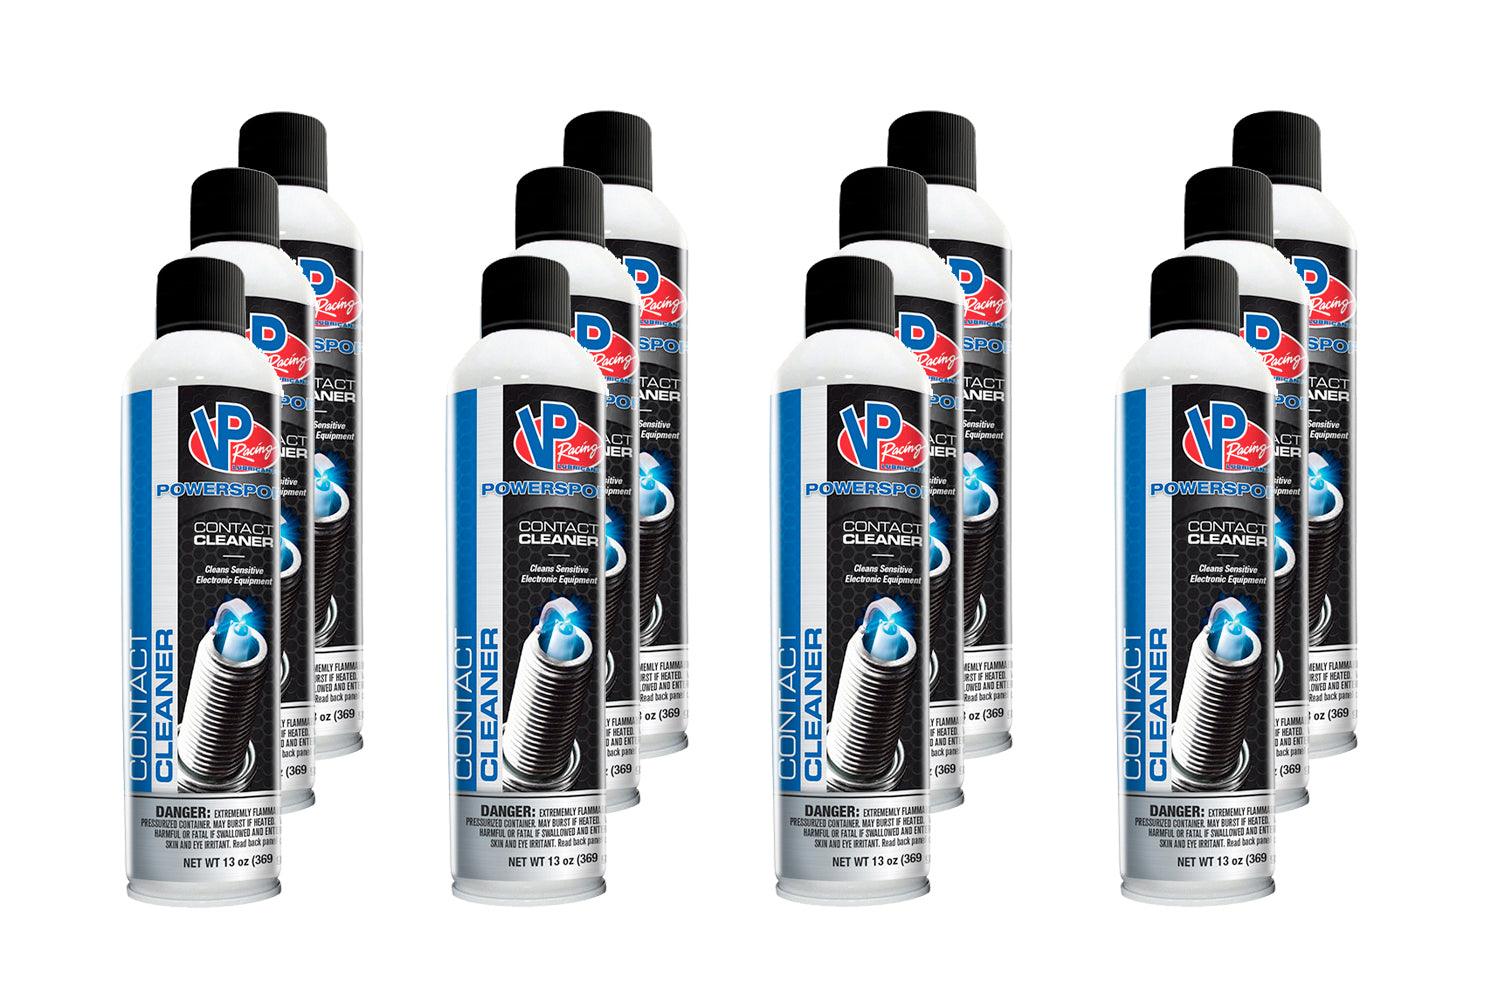 VP Contact Cleaner Aerosol 13oz (Case 12) - Burlile Performance Products